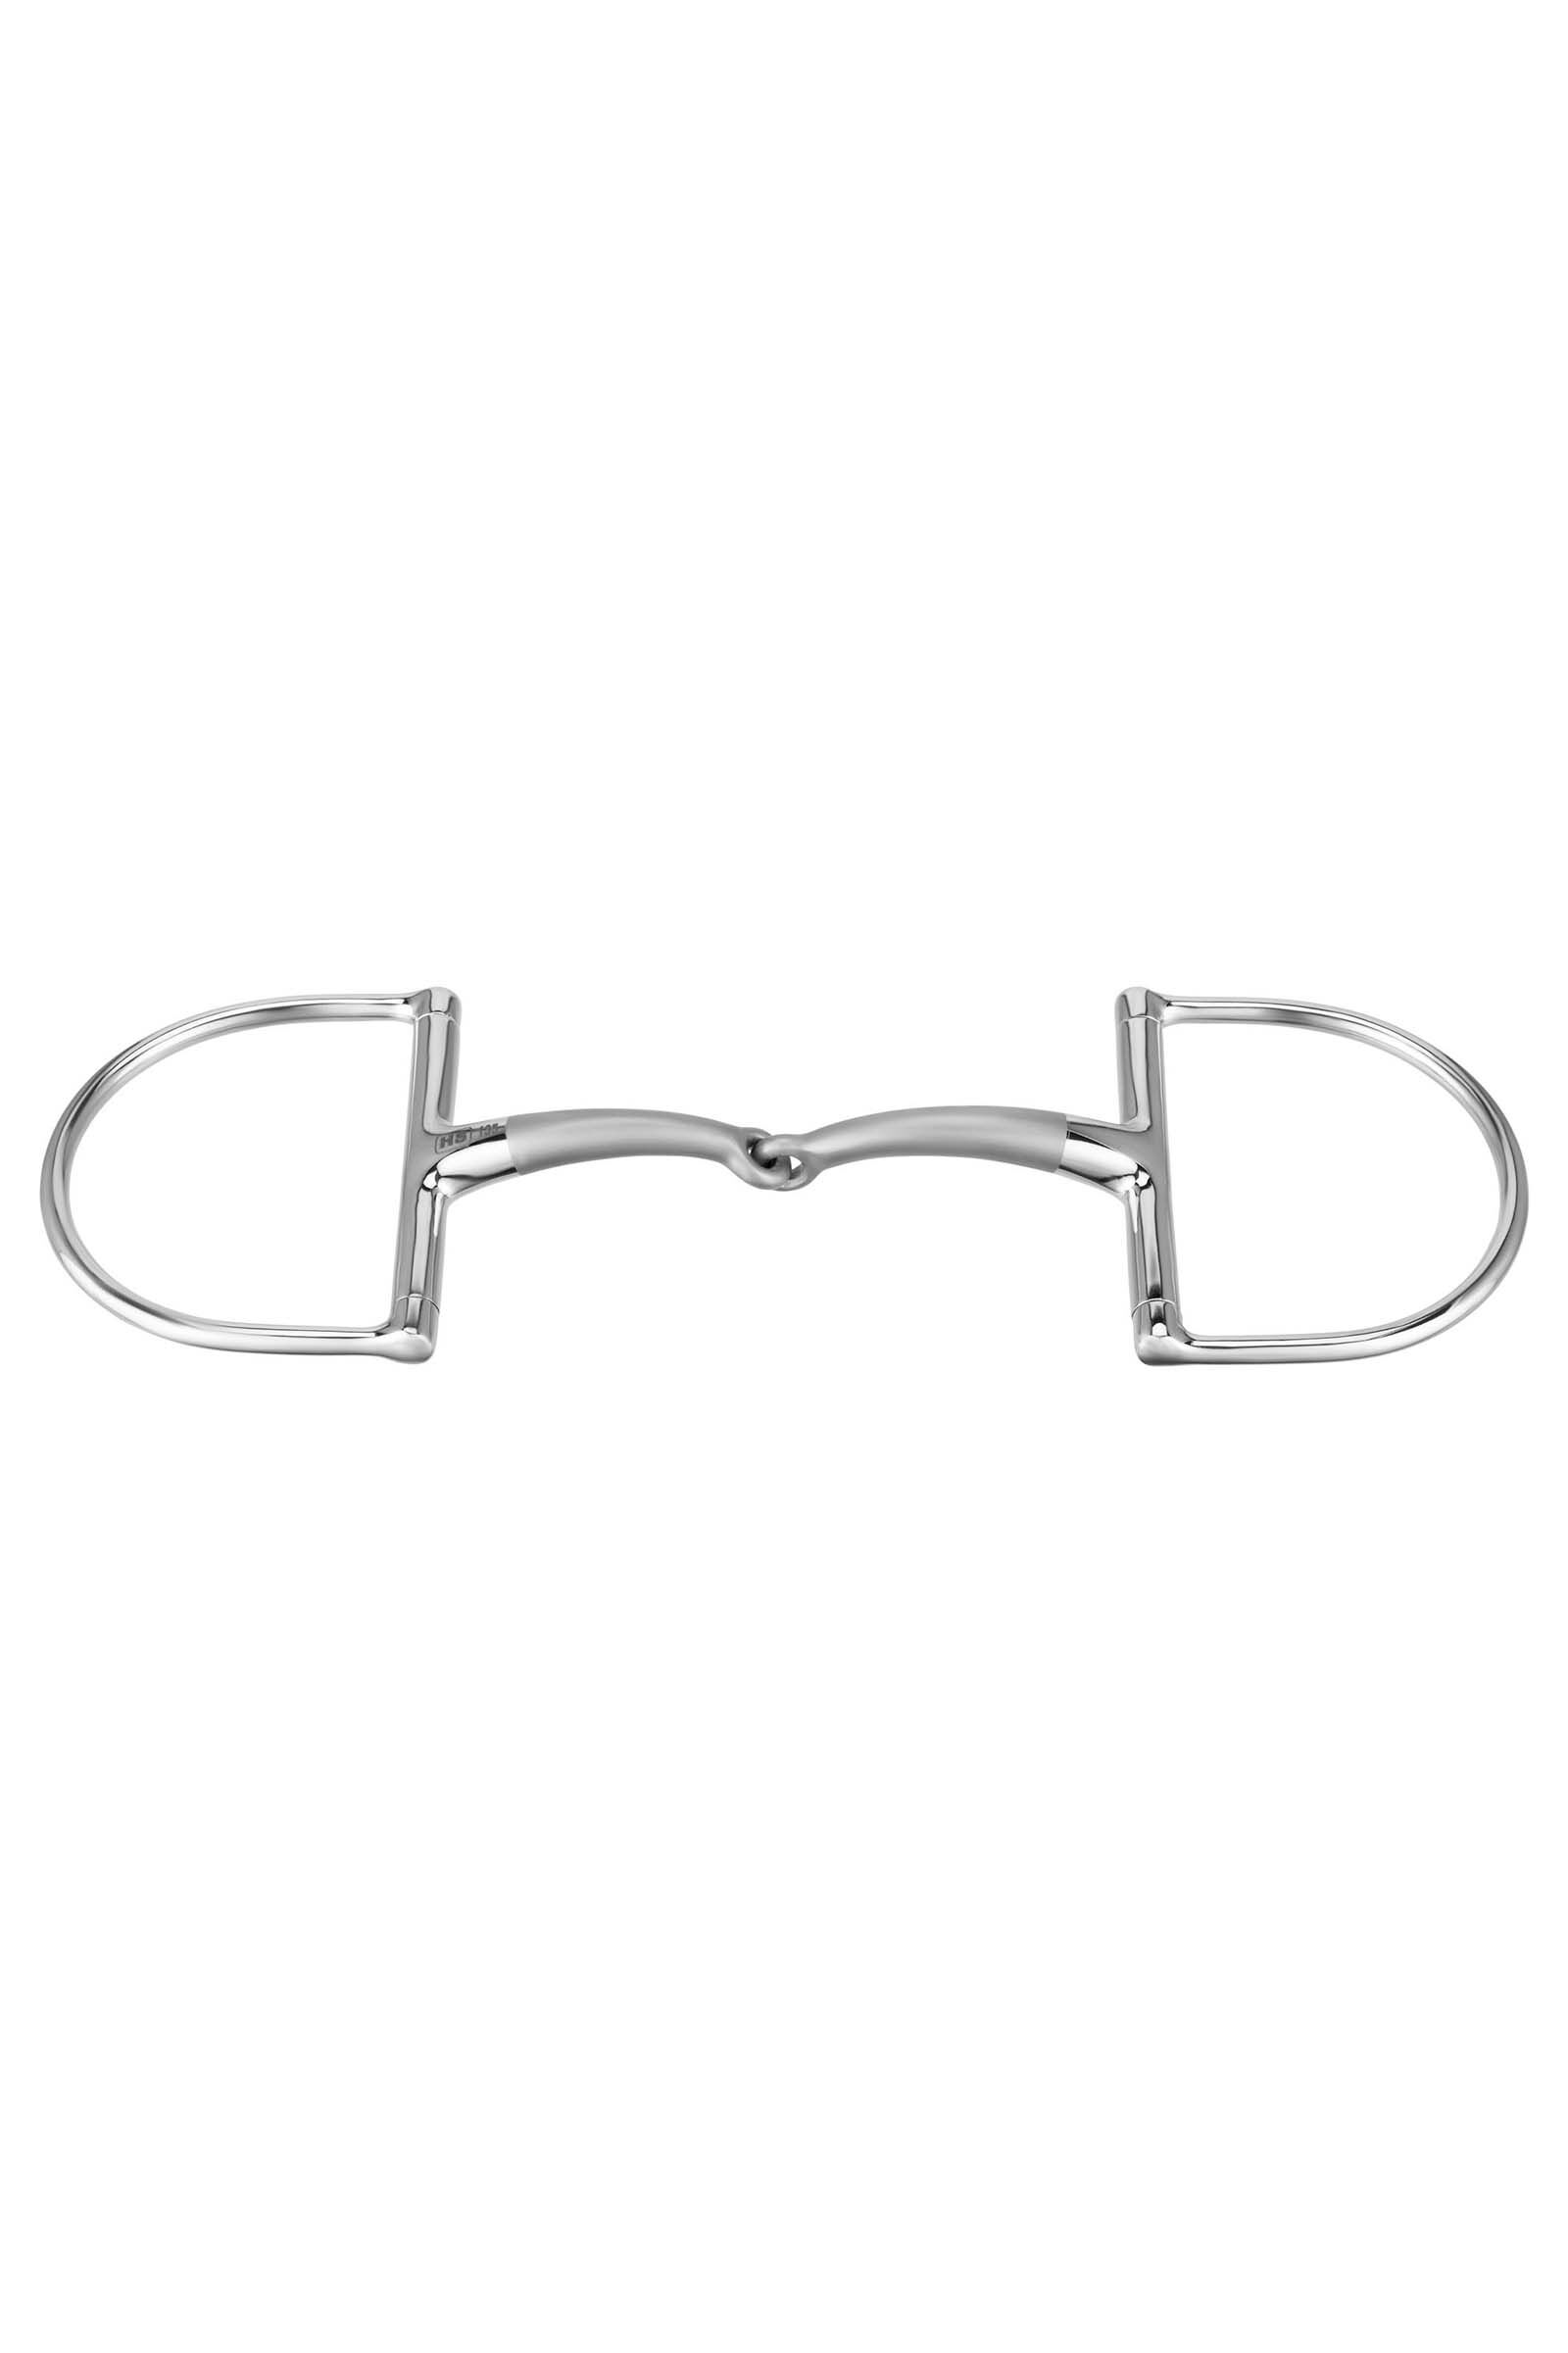 Sprenger Nathe 3 Ring with Sliding Cheek | All About Equestrian